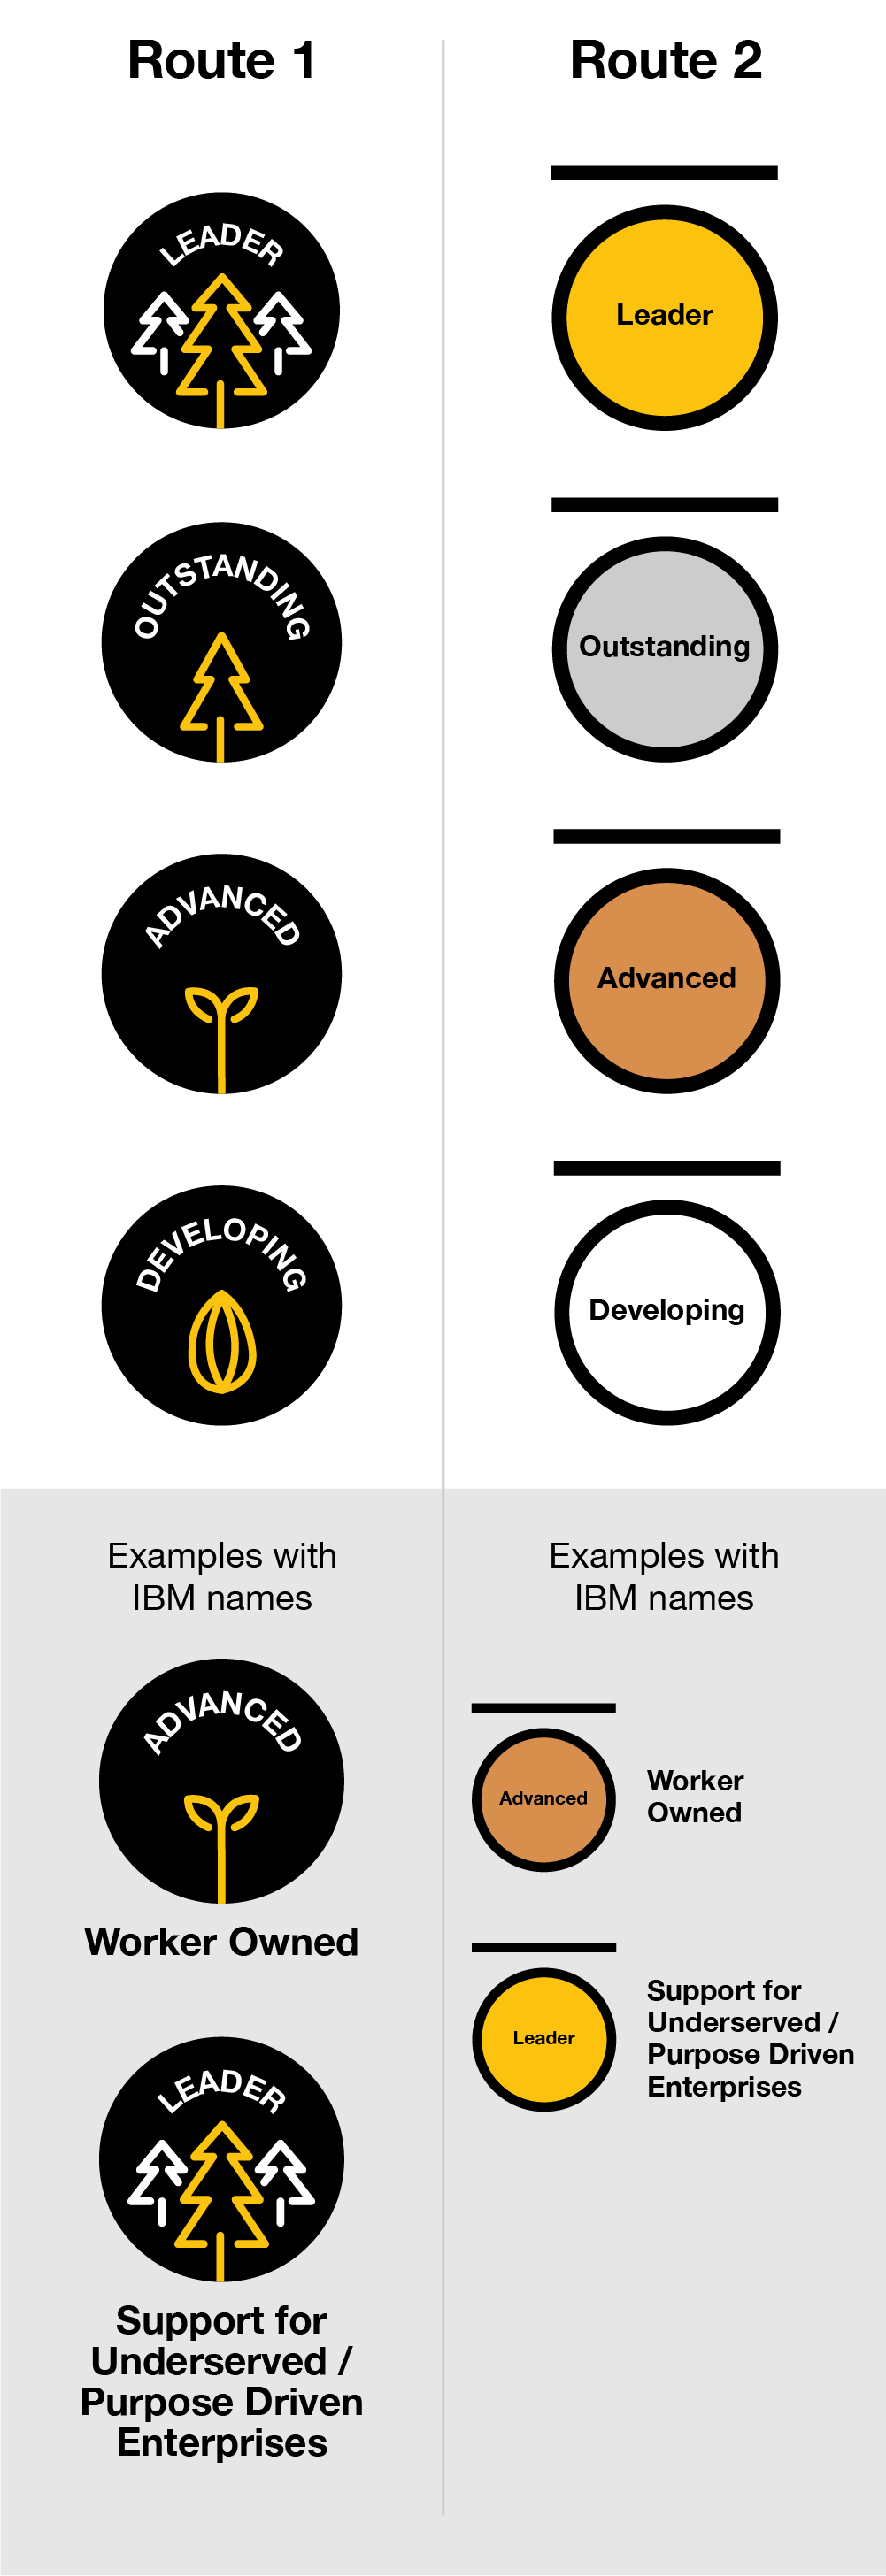 Route 1: 4 circular badges. The first with the word “Developing”, accompanied by a visual of a seed. The second with the word “Advanced”, accompanied by a visual of a sapling. The third with the word “Outstanding”, accompanied by a visual of a tree. The fourth with the word “Leader”, accompanied by a visual of a forest. The IBM names would sit below the badge.
Route 2: 4 medals. The first has no fill color, with the word “Developing” on the medal. The second has a bronze color, with the word “Advanced” on the medal. The third has a silver color, with the word “Outstanding” on the medal. The fourth has a gold color, with the word “Leader” on the medal. The IBM names would sit to the right of the medal.